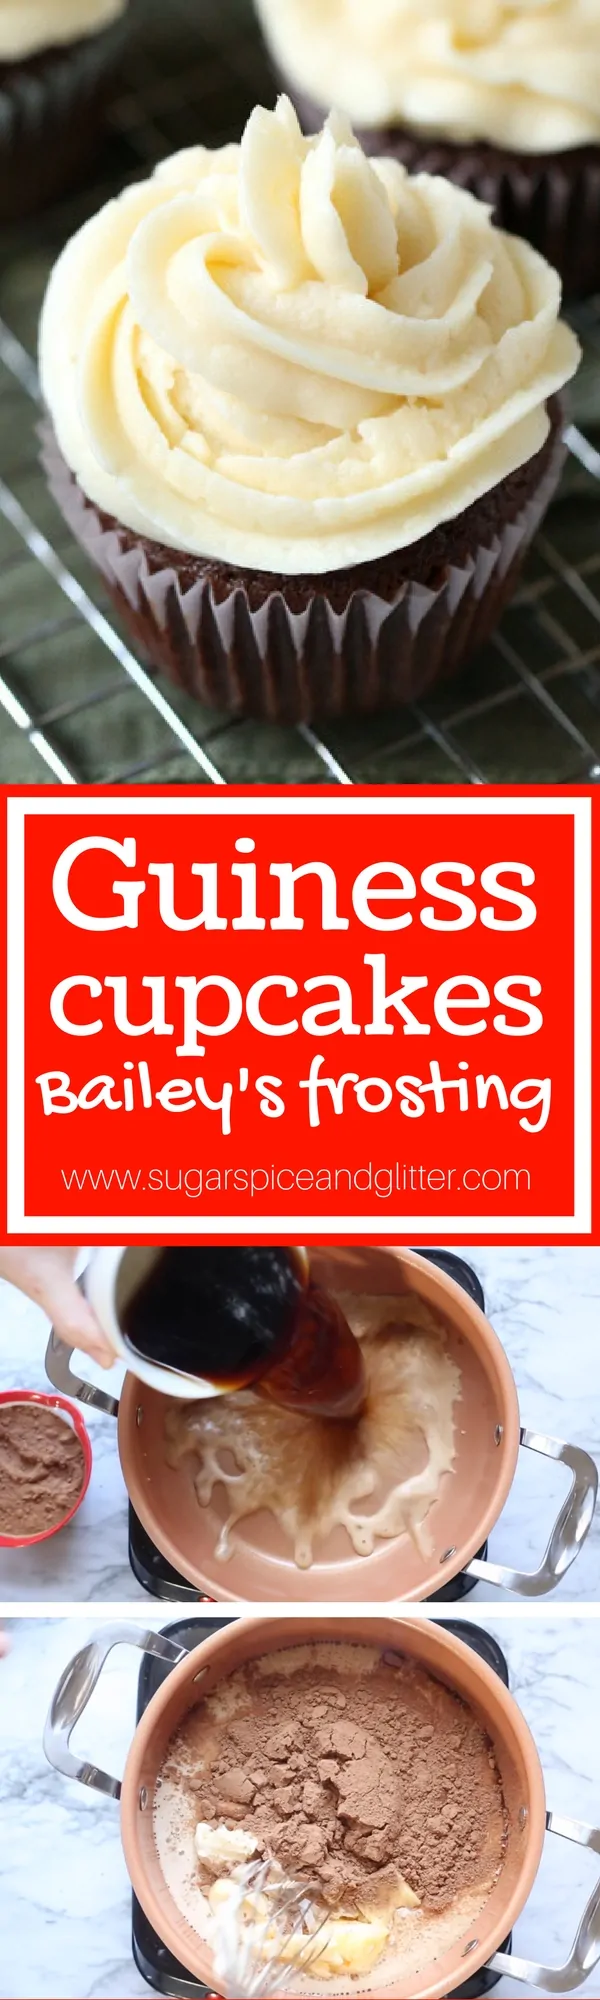 How to make Chocolate Guinness Cupcakes with Bailey's Irish Cream Frosting - a boozy cupcake recipe that is utterly decadent with a rich chocolate flavor and velvety frosting